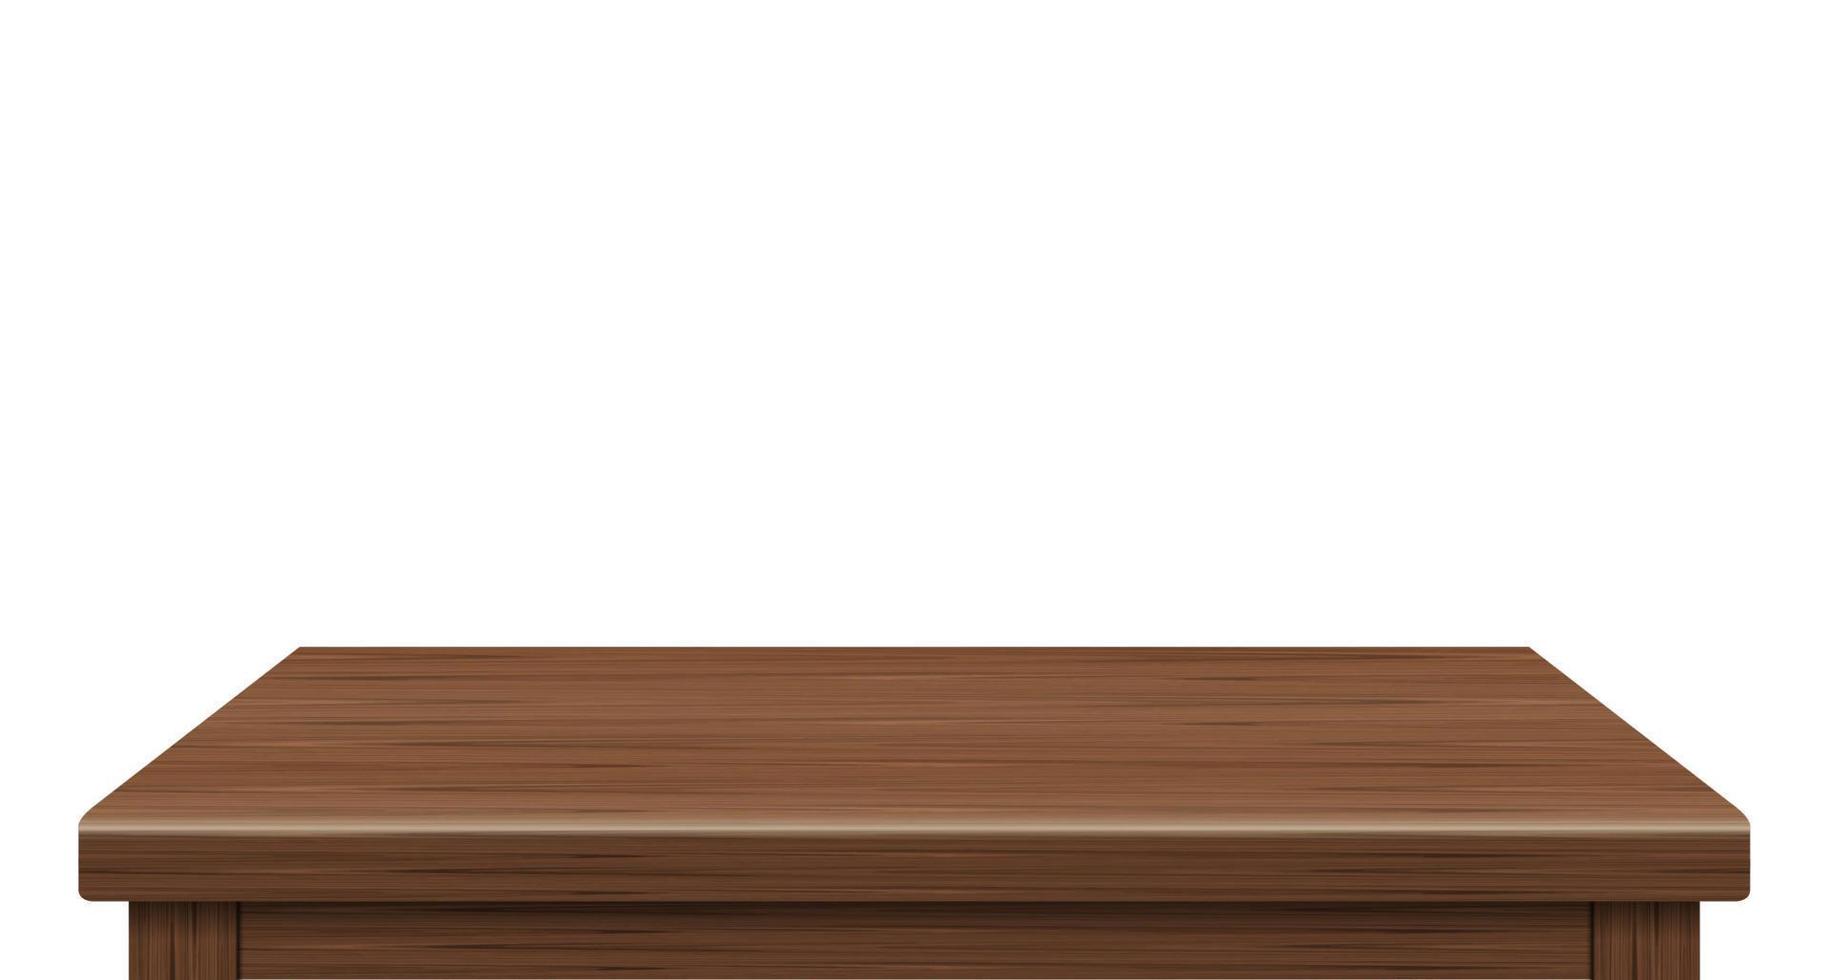 Empty wooden table side view of free space, For your copy branding. Used for display or montage products. Vintage style concept. Wood brown realistic surface isolated on white background. 3D Vector. vector